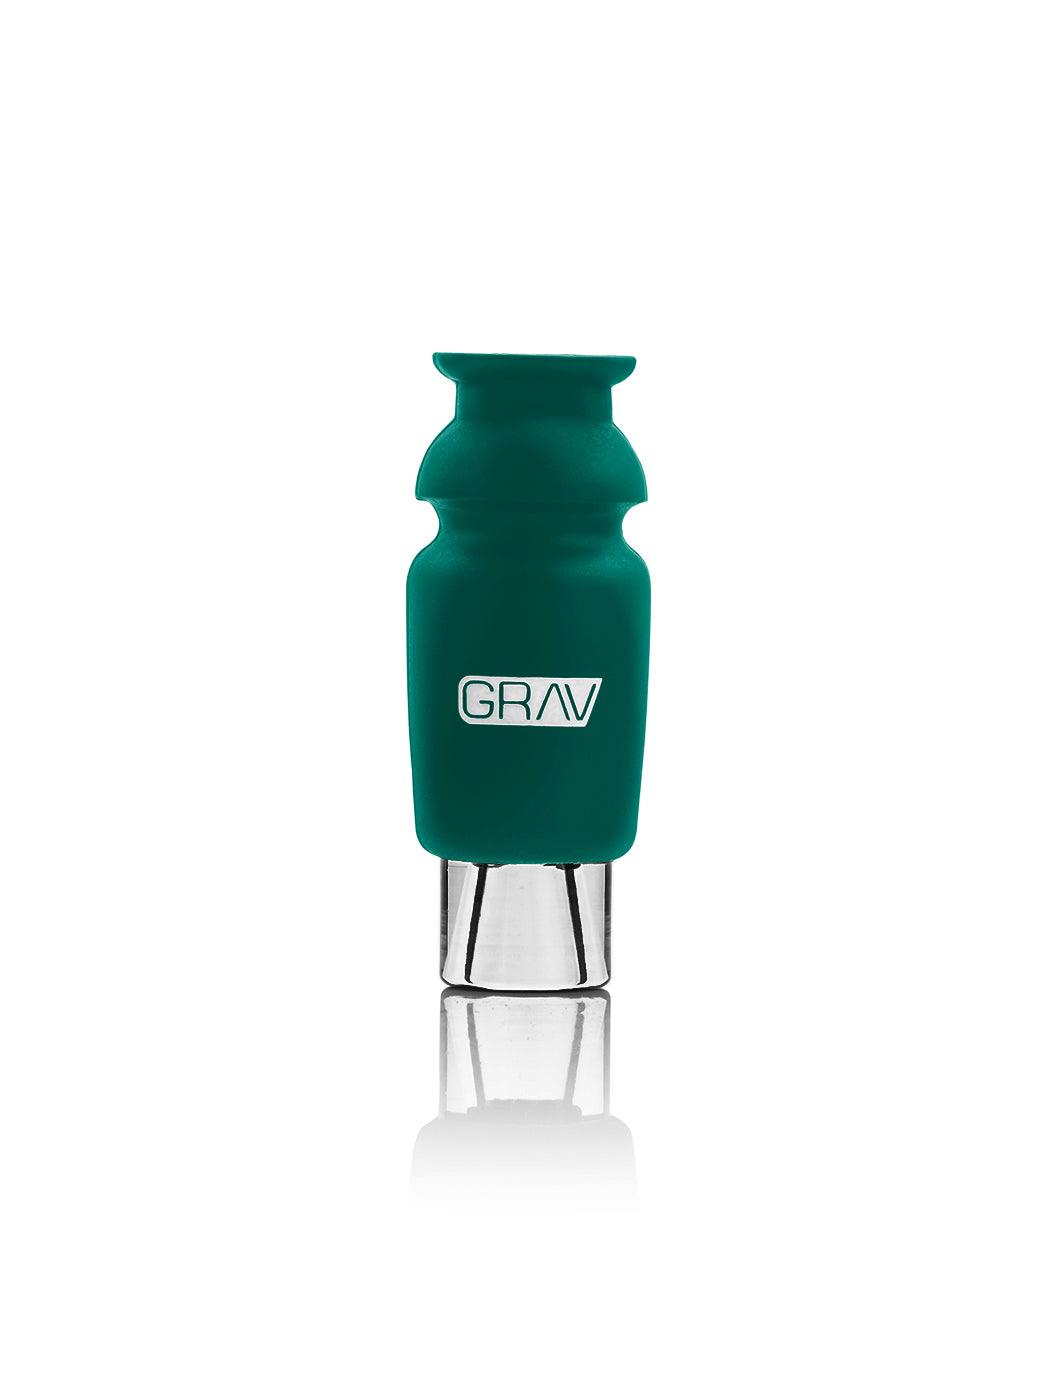 GRAV Silicone-Capped Glass Crutch in Green - Front View on White Background